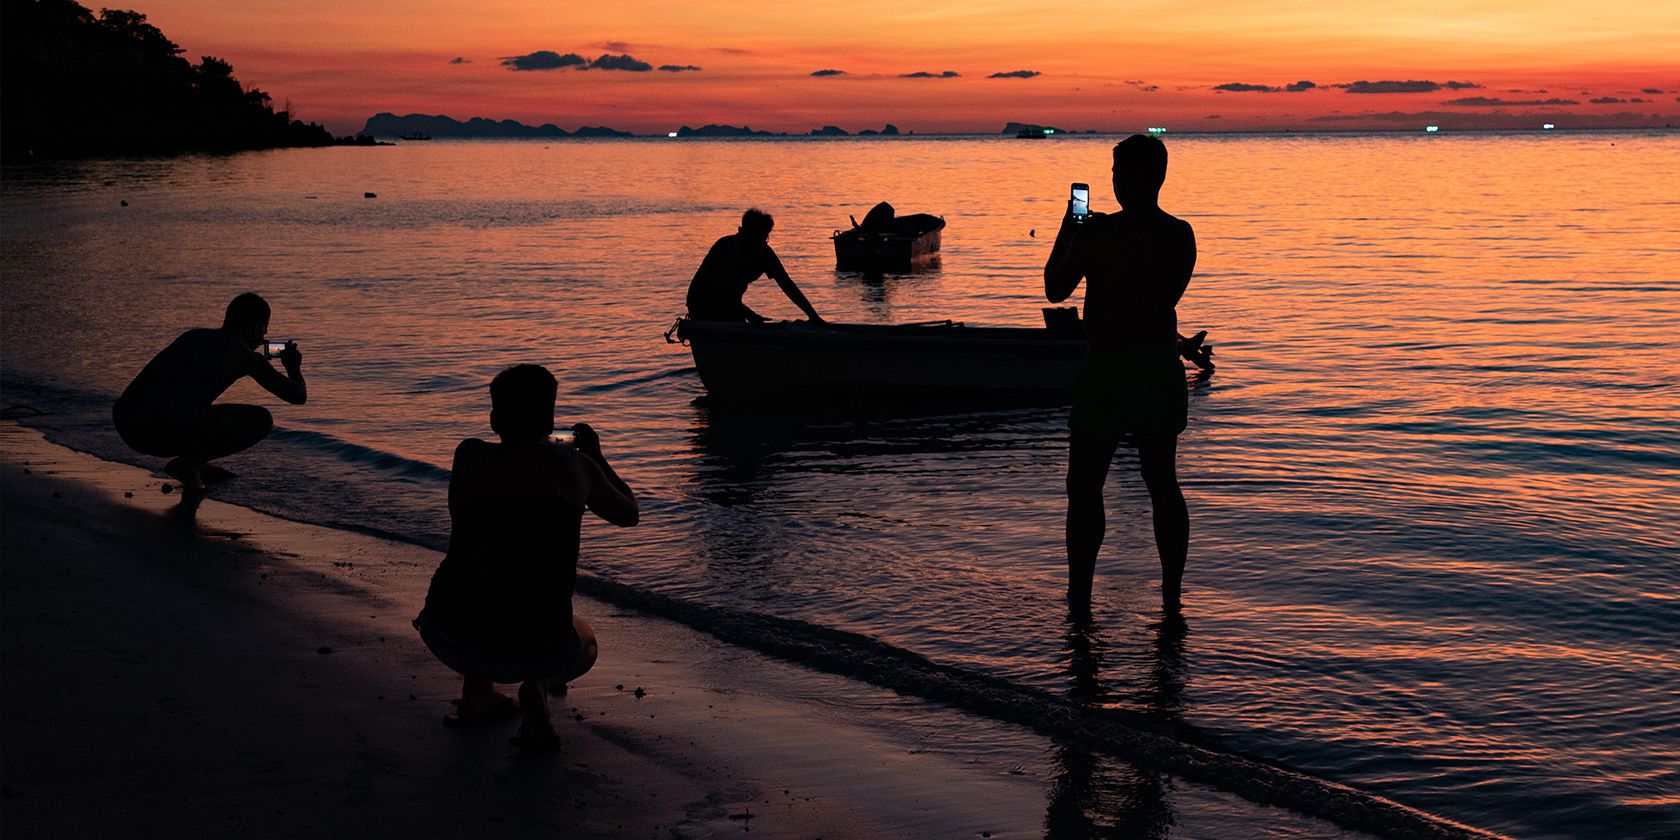 three people taking sunset images on a beach with a fisherman on the foreground